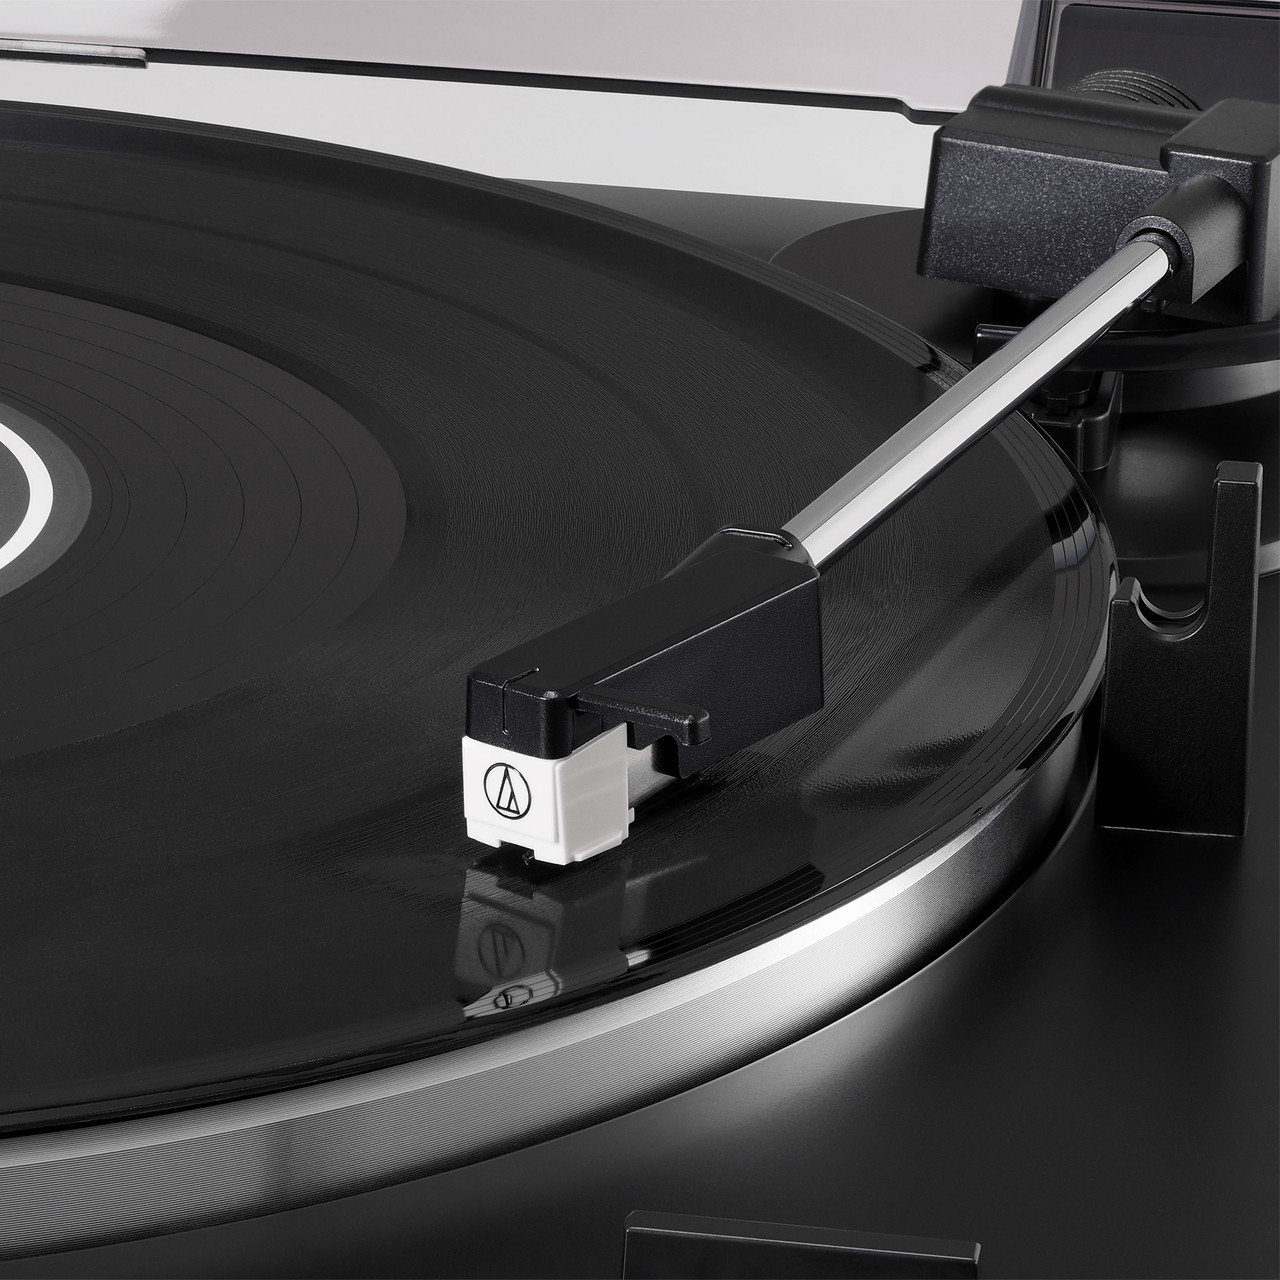 Audio-Technica LP60X Fully Automatic Belt-Drive Turntable